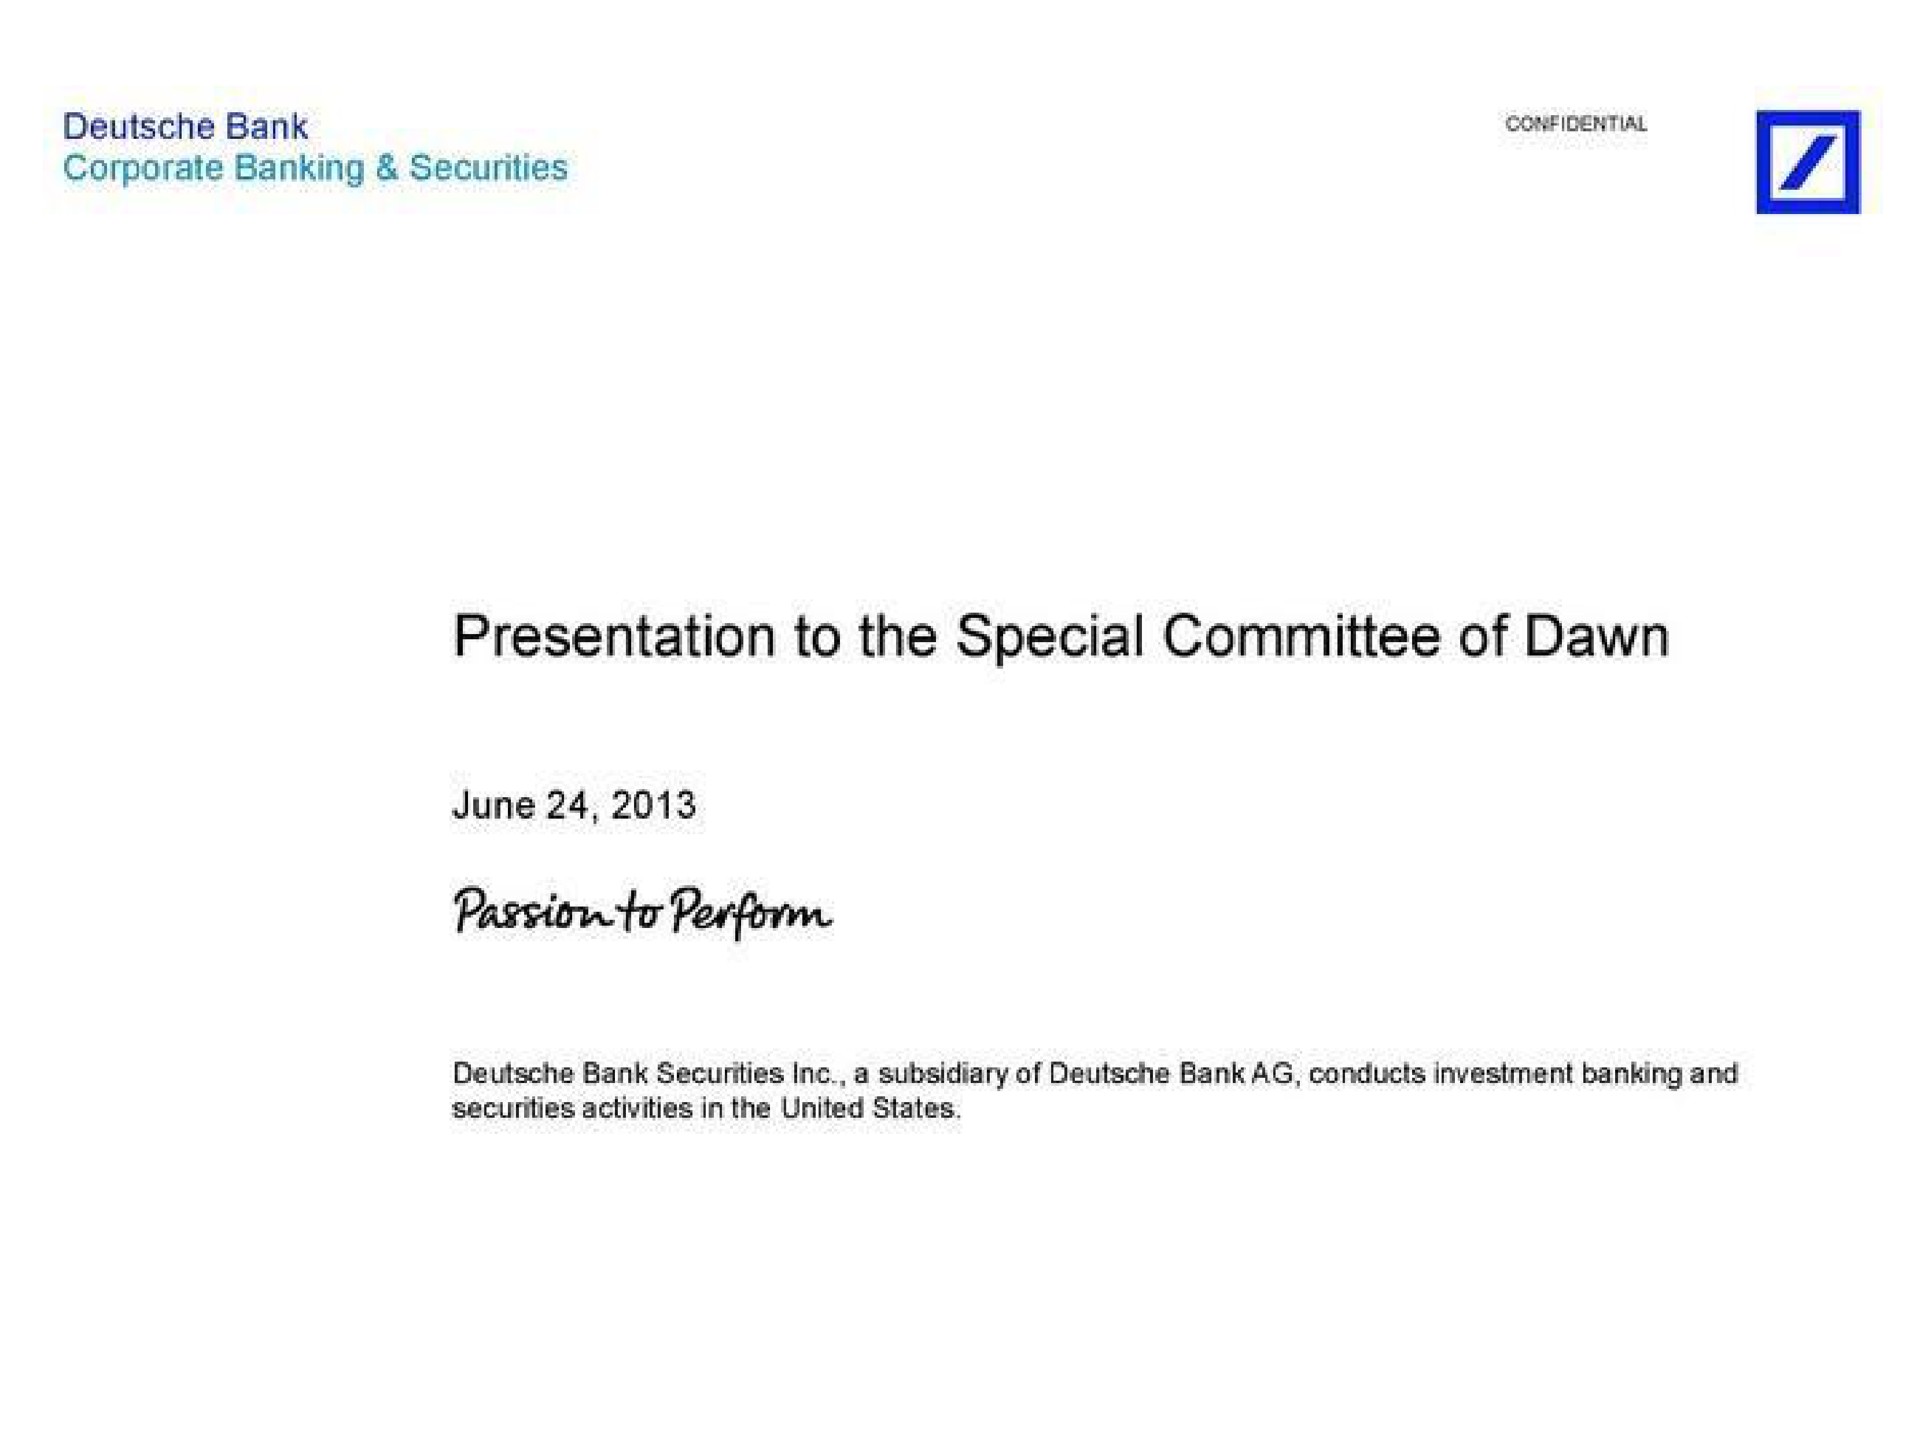 presentation to the special committee of dawn passion perform | Deutsche Bank